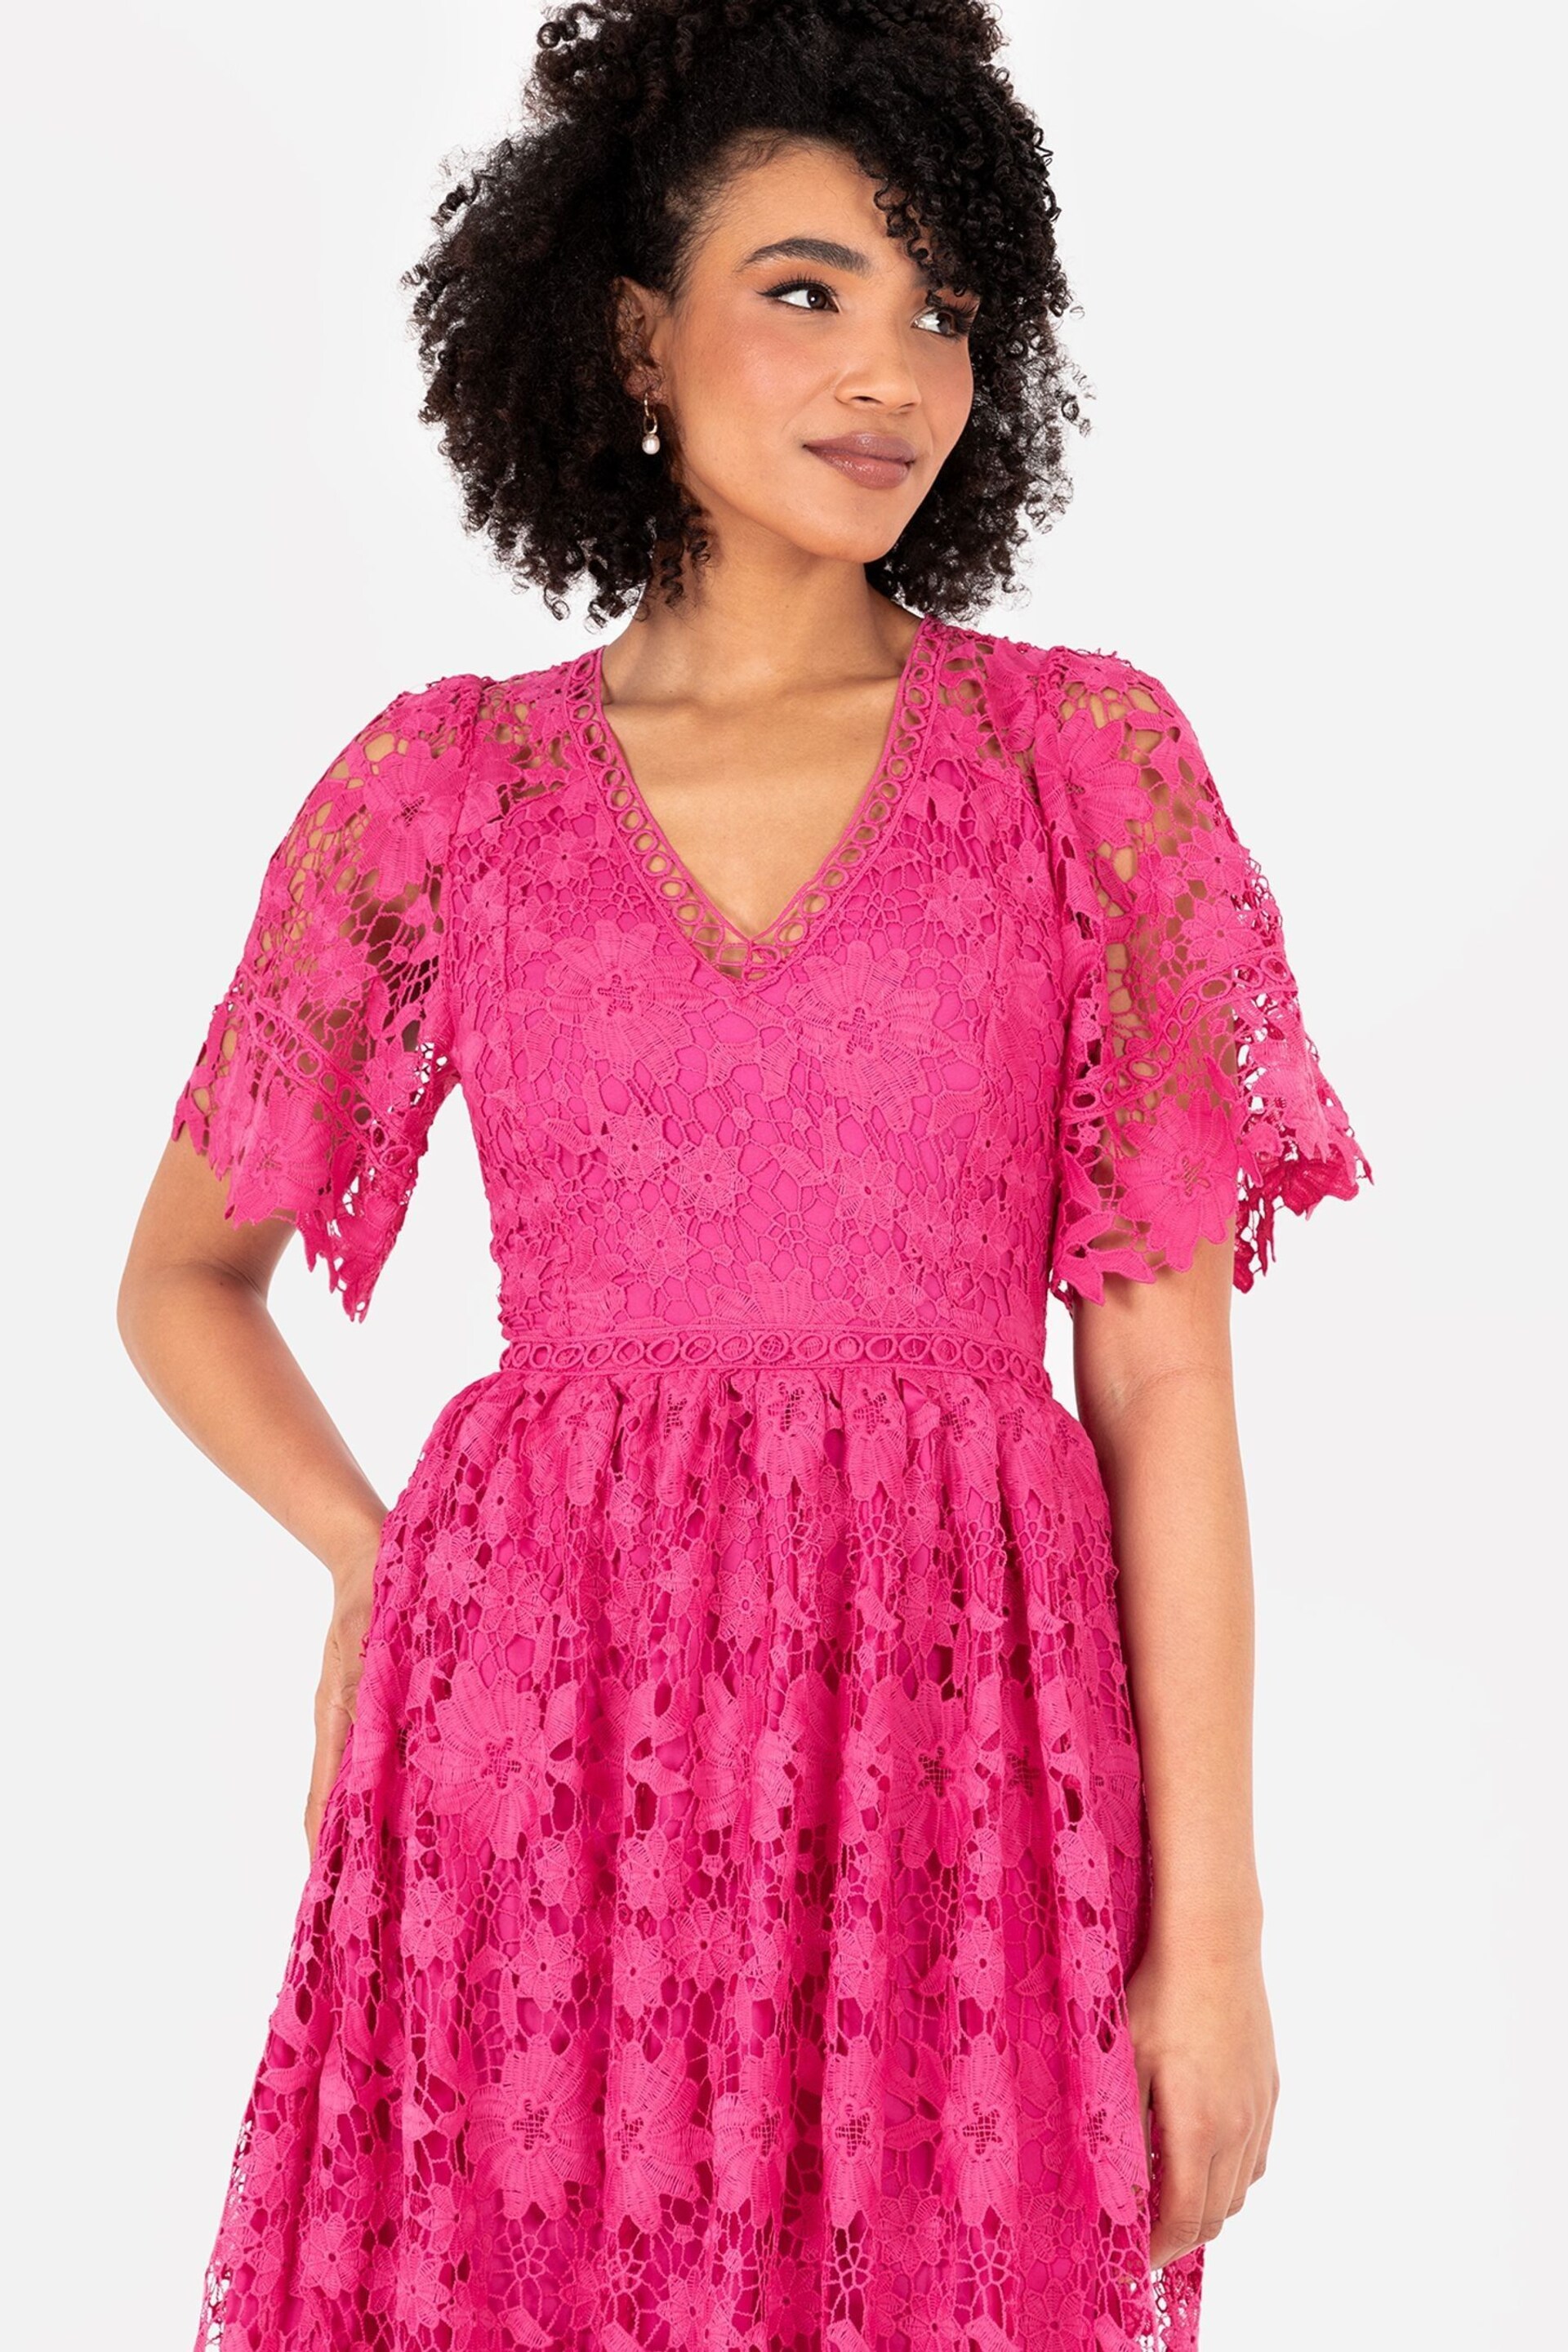 Lovedrobe Lace V-Neck Midaxi Dress With Trim Details - Image 5 of 5